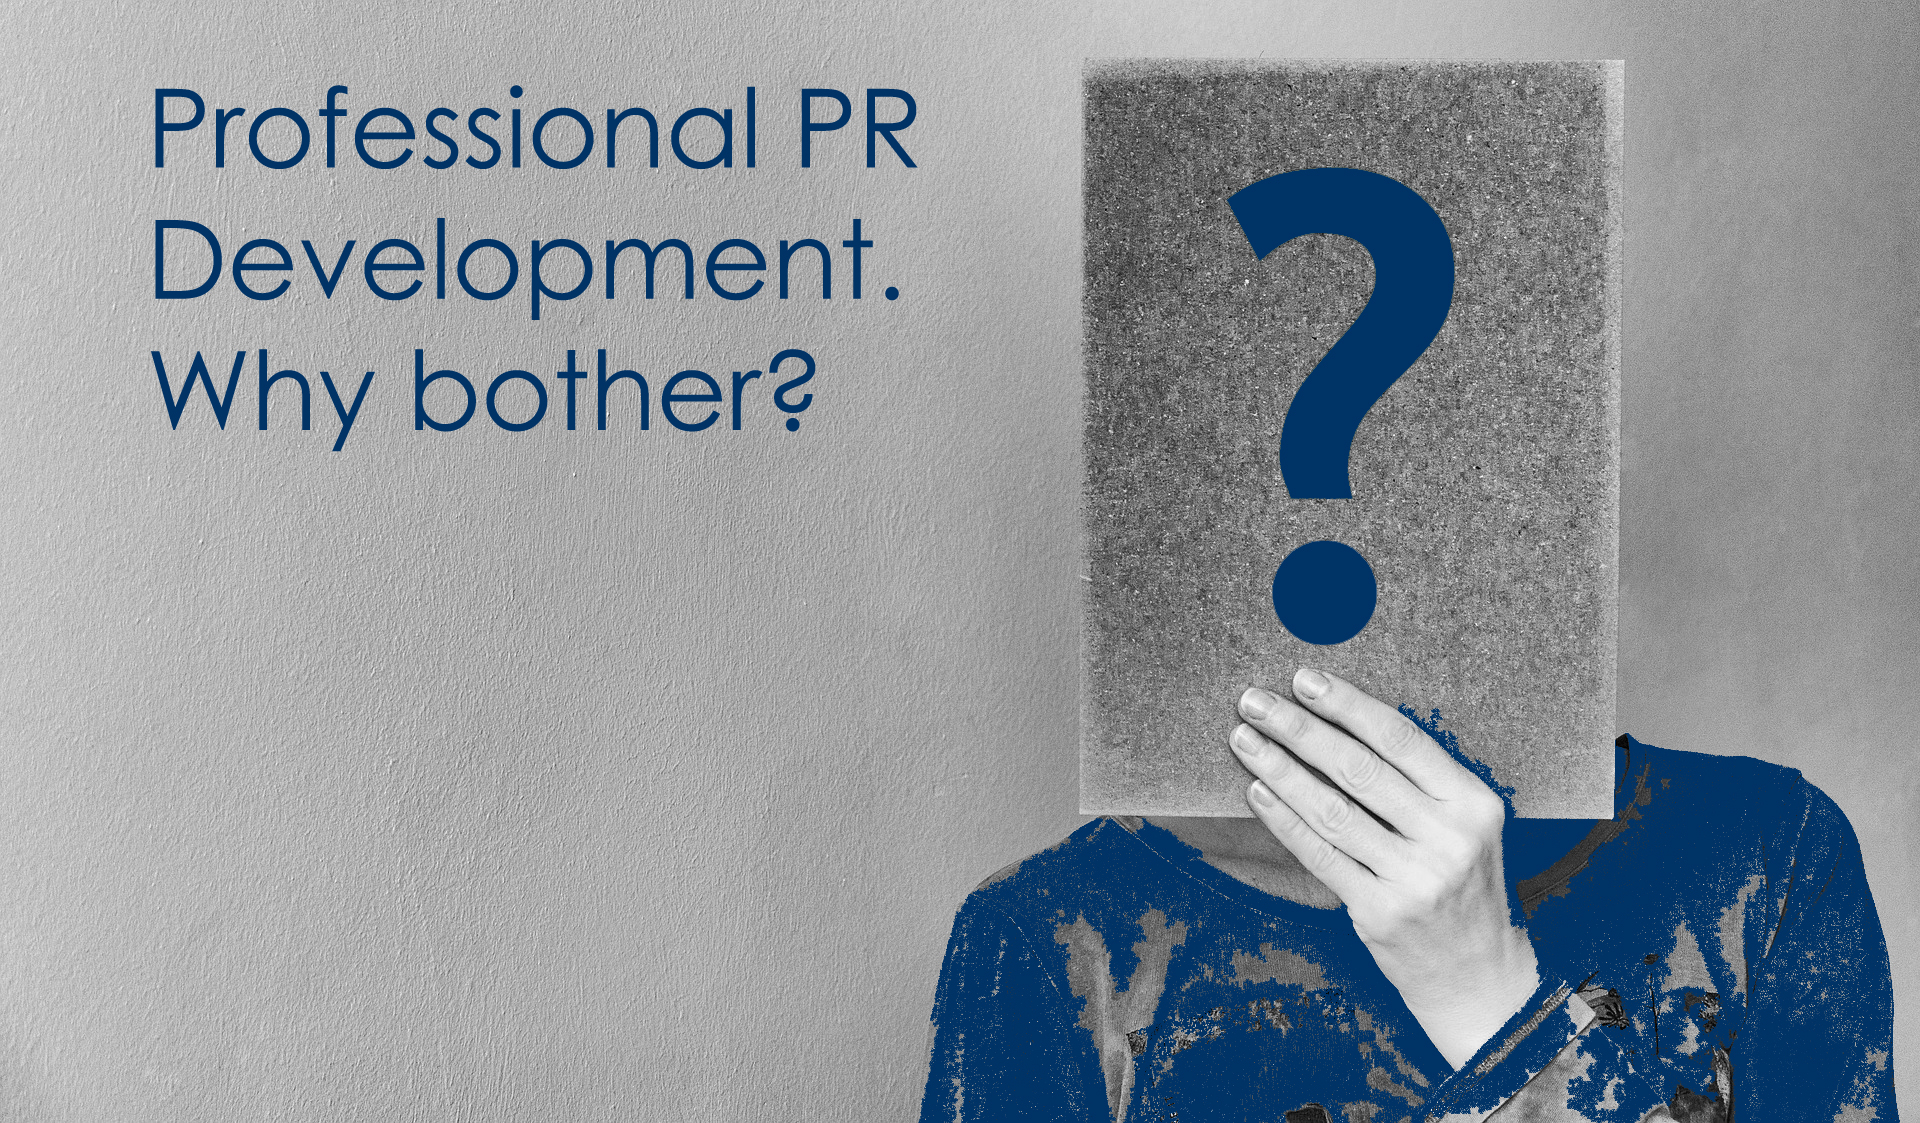 Professional PR Development. Why bother?